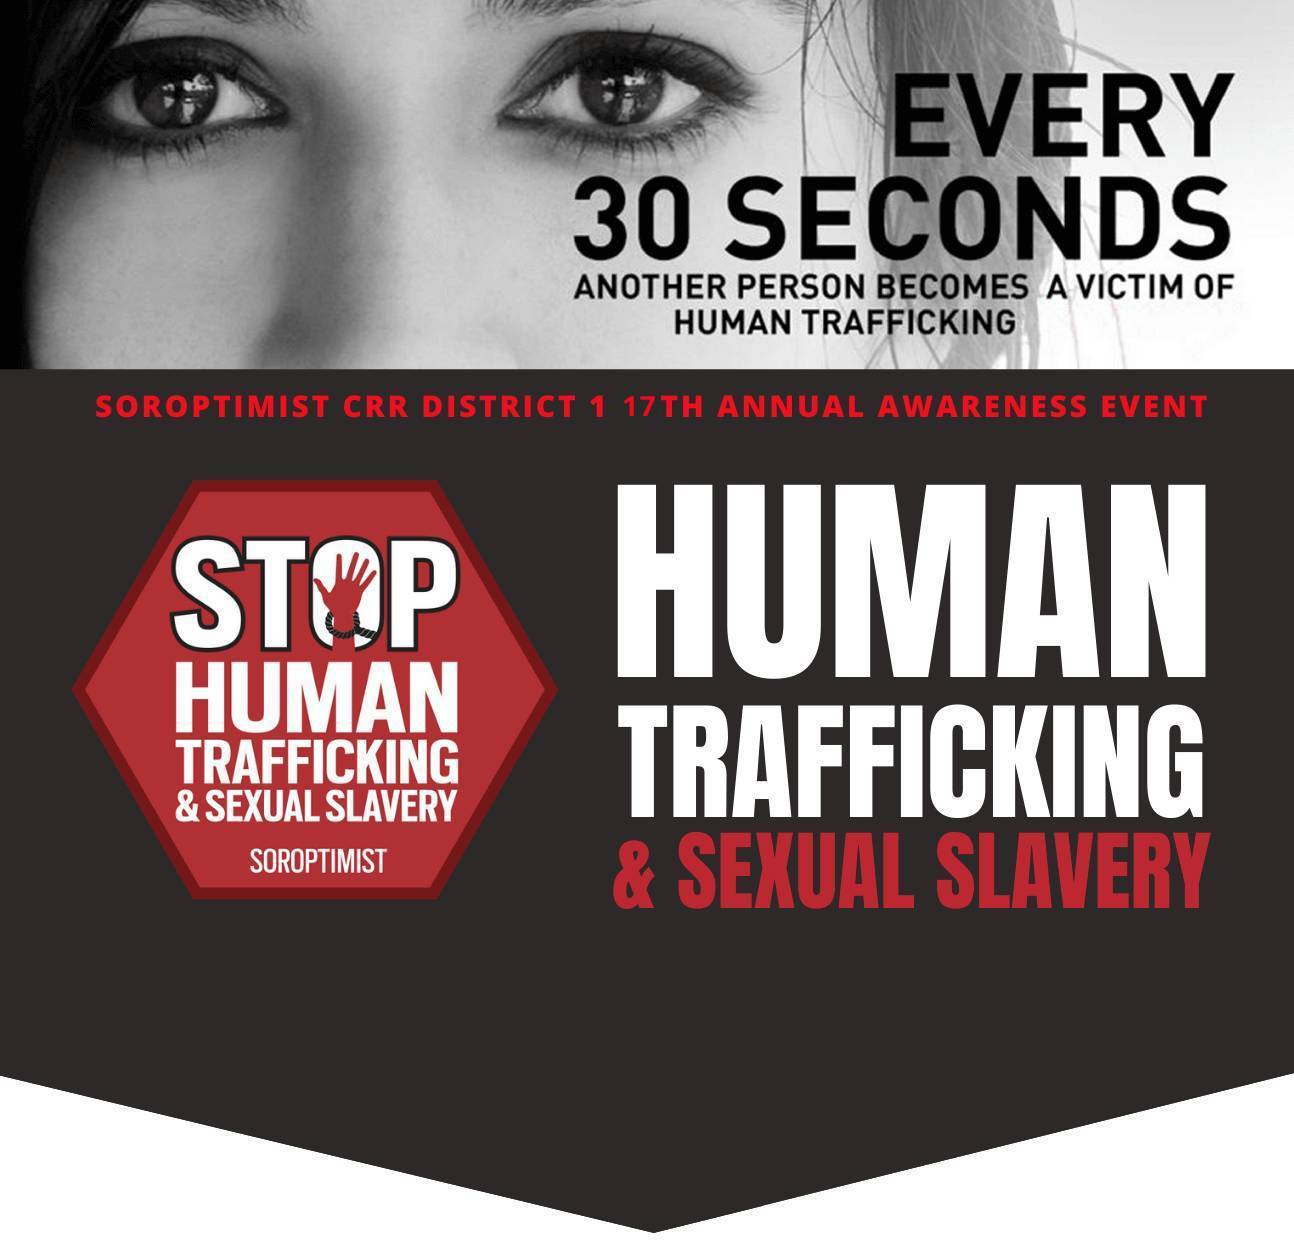 Stop human trafficking & sexual slavery flyer.